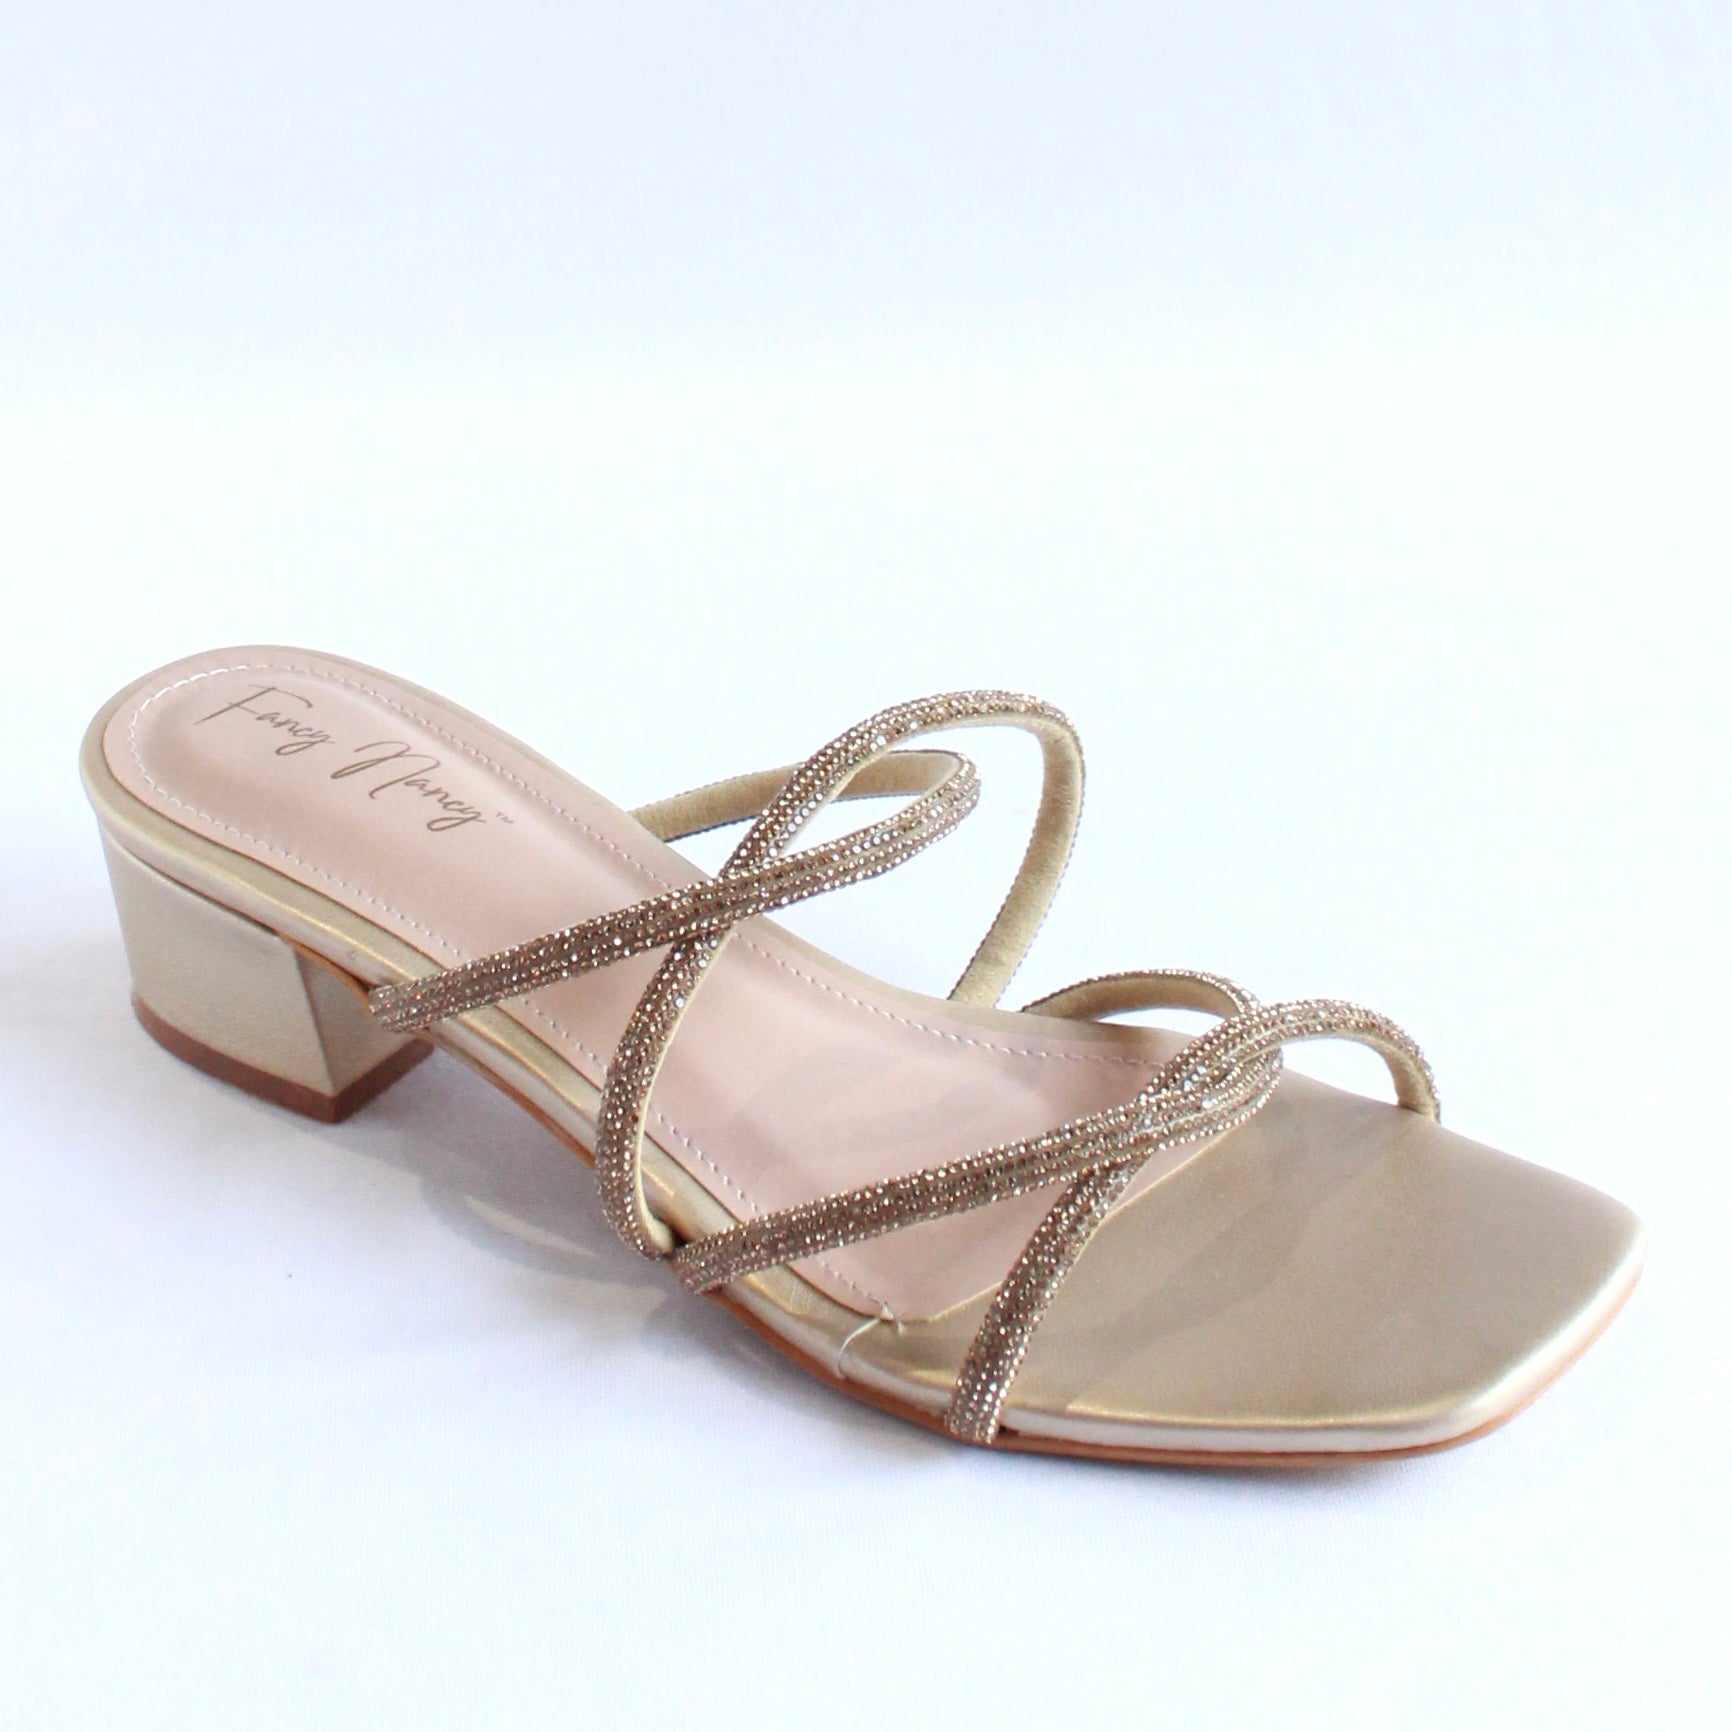 JOVE | Shop Women Golden Solid Sandals Online from JOVE available at  ShoeTree.